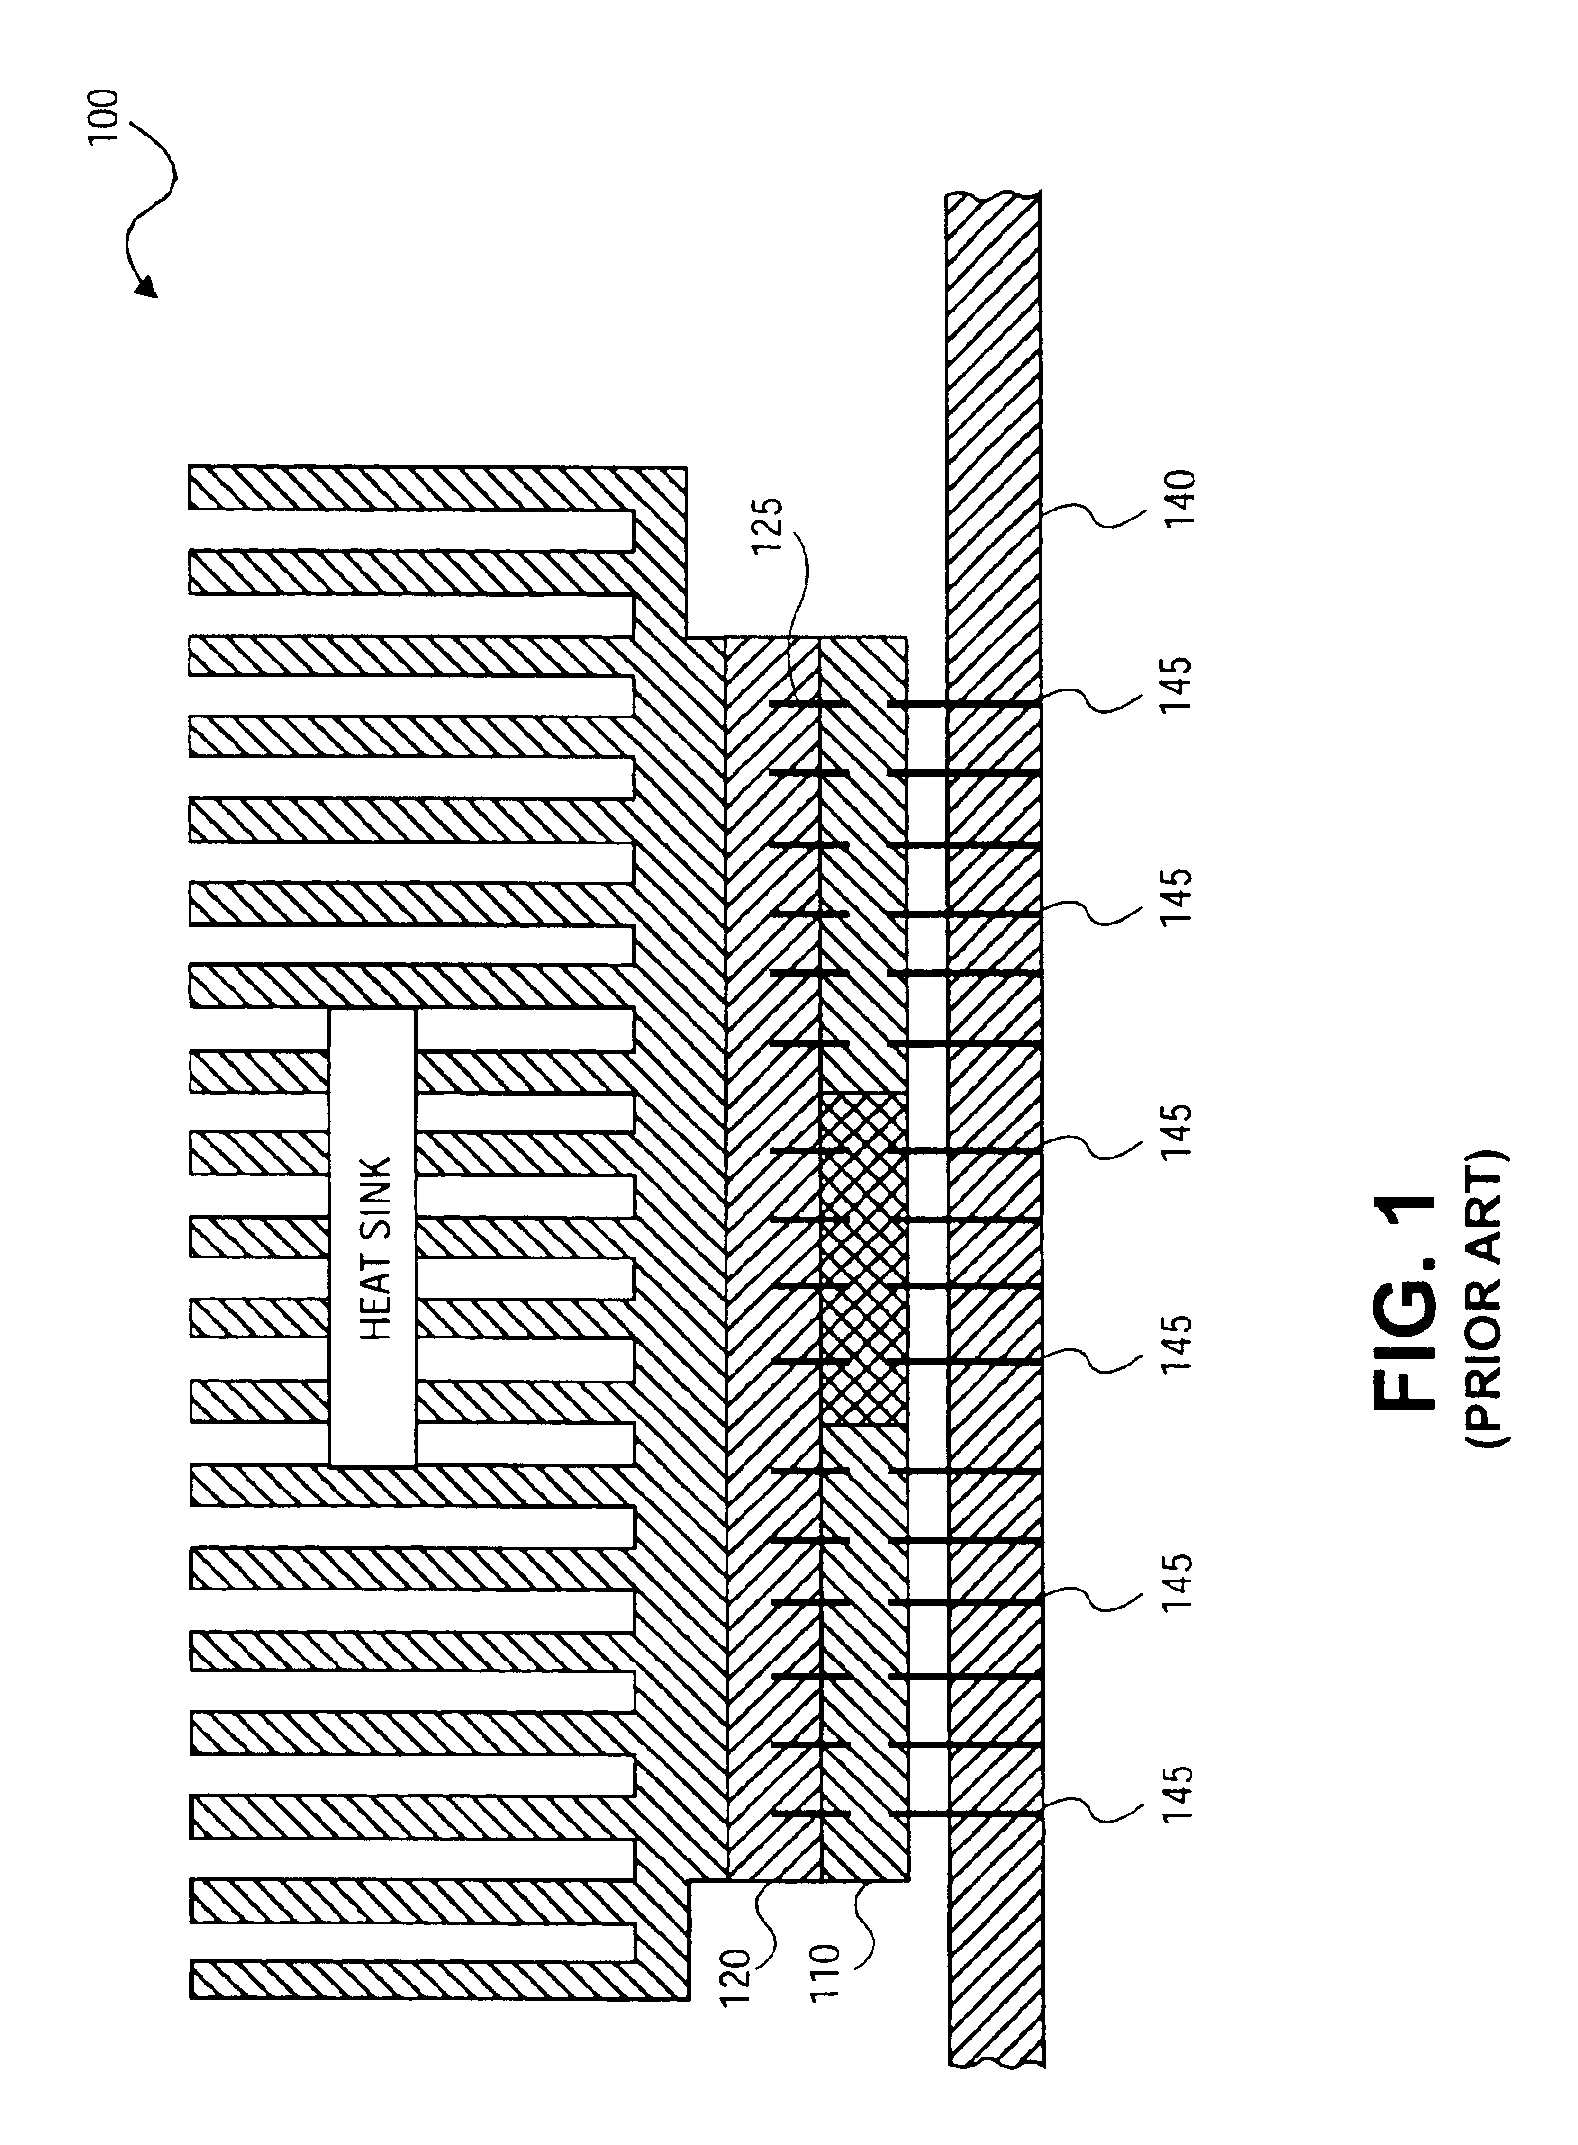 Array socket with a dedicated power/ground conductor bus